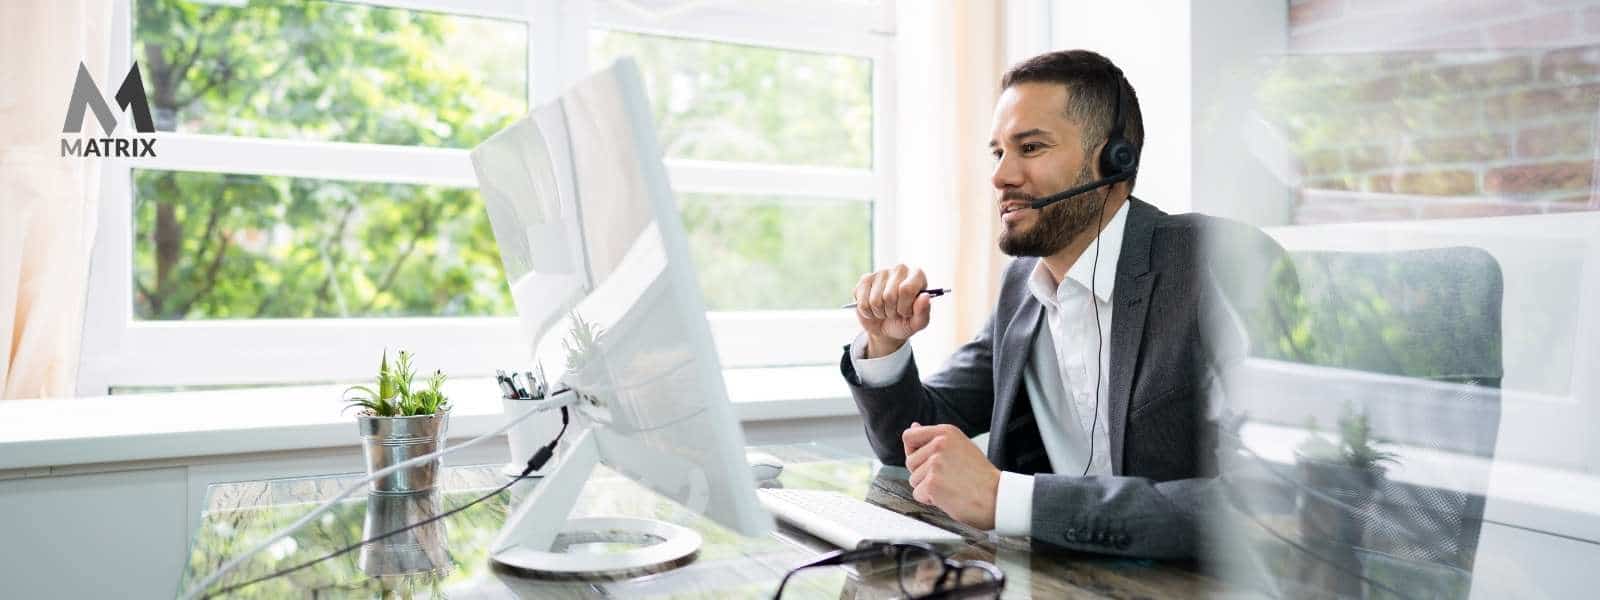 benefits of using customer service software